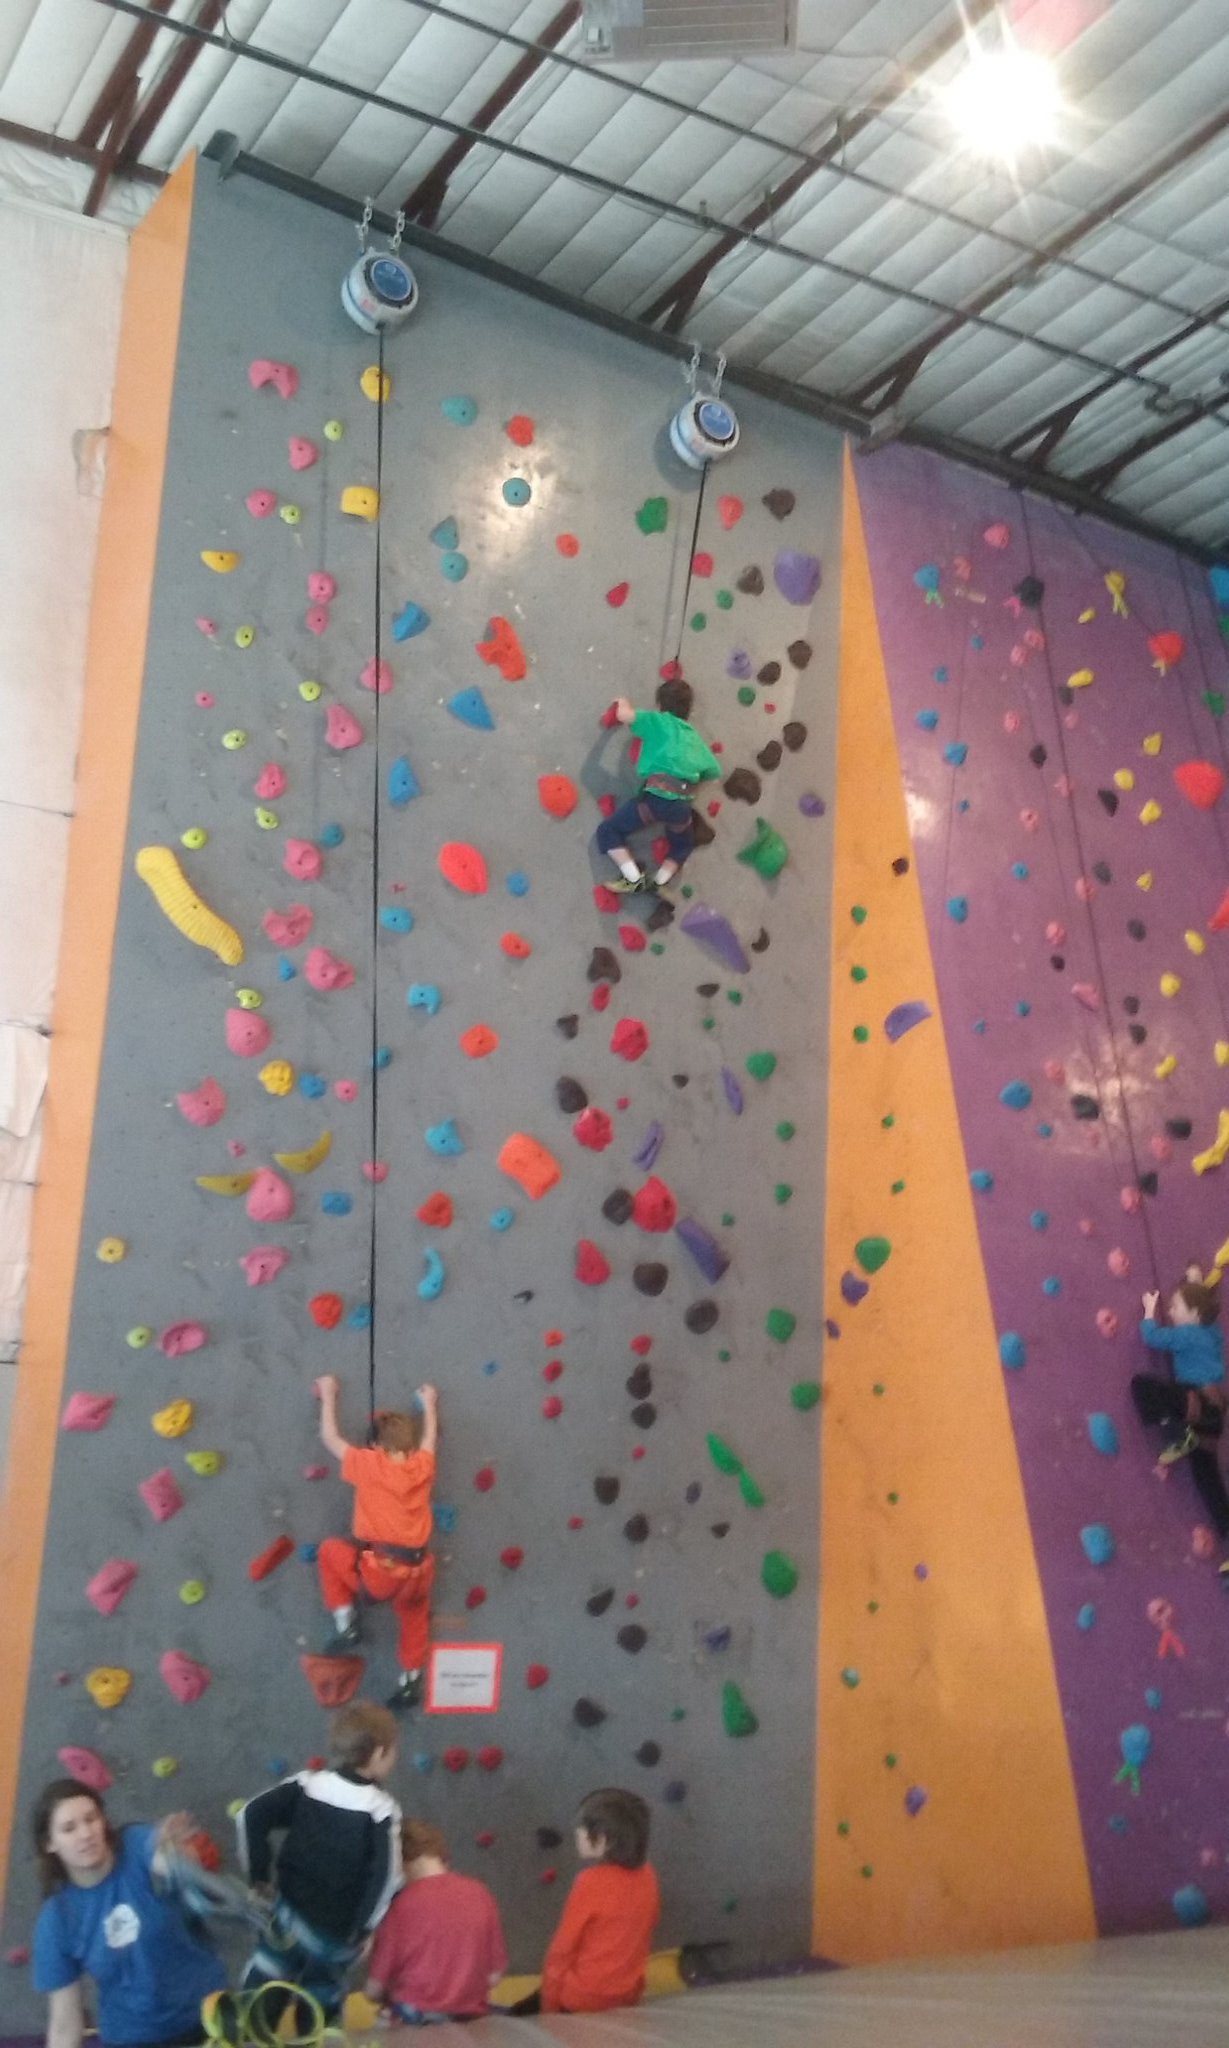 Very tall climbing wall with multi-colored holds. Two kids are on the wall. One is in a orange shirt and then one up further on the right is in a green shirt.